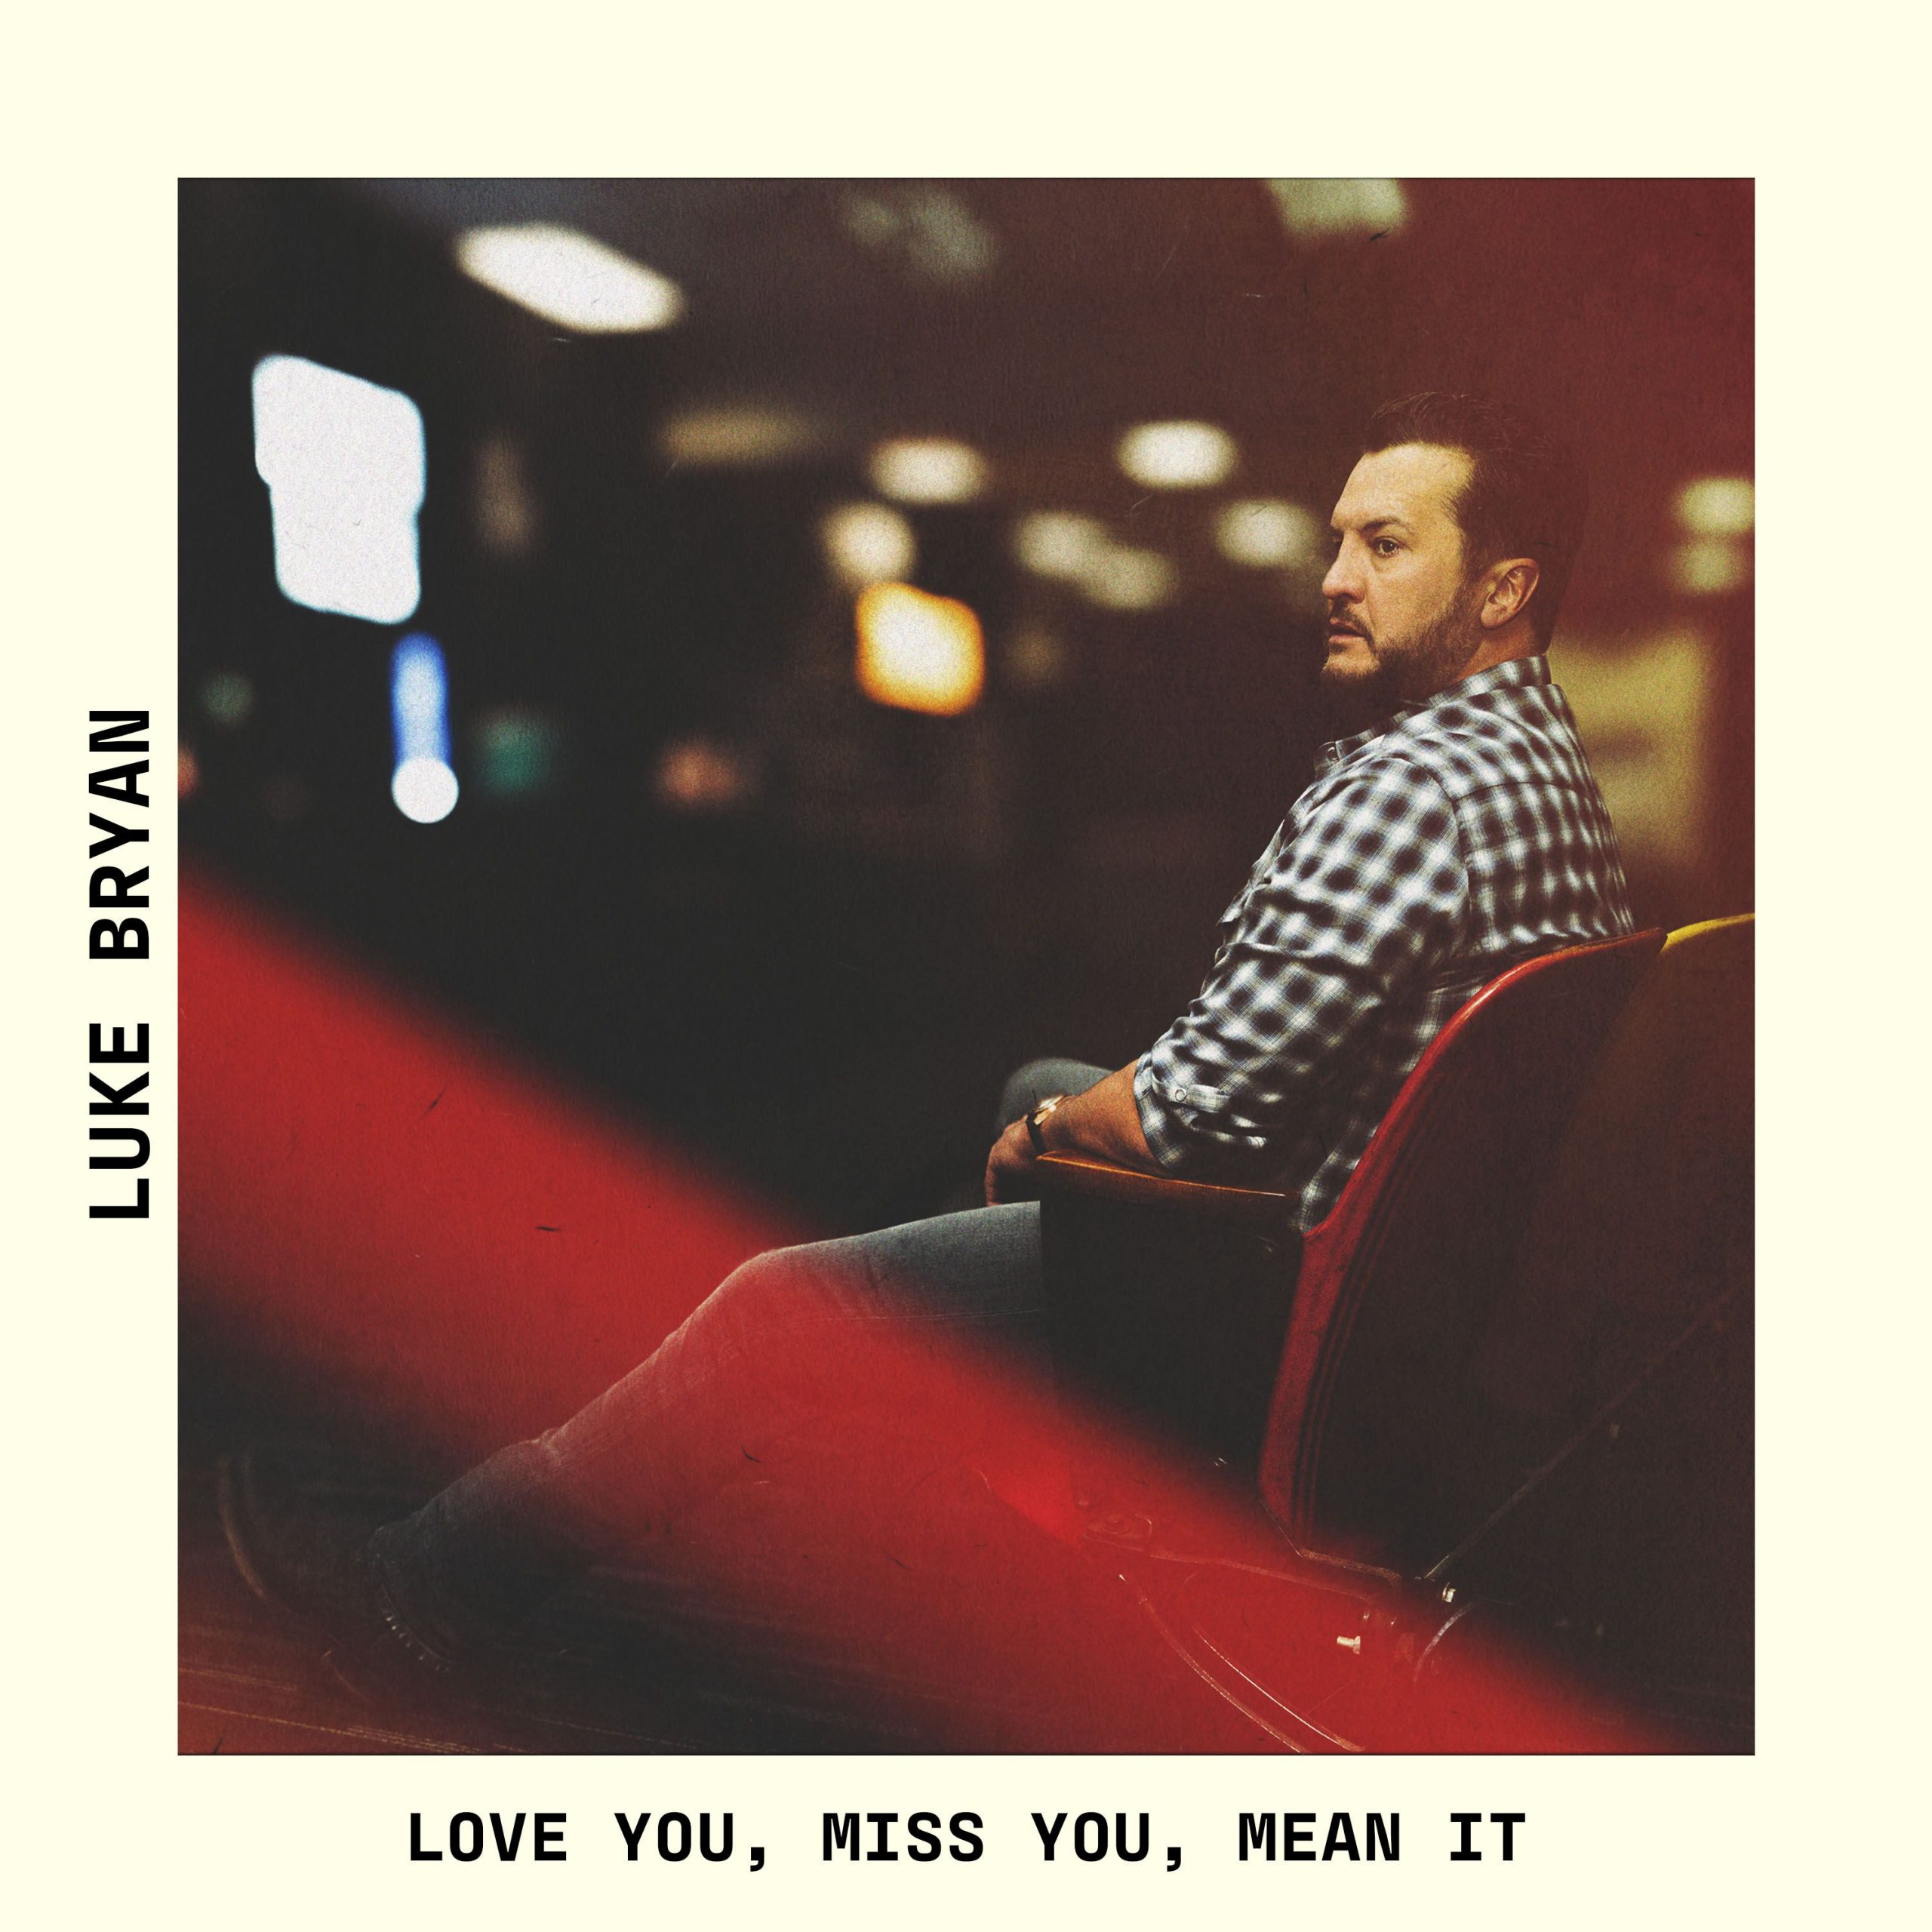 Luke Bryan Releases New Single “Love You, Miss You, Mean It”